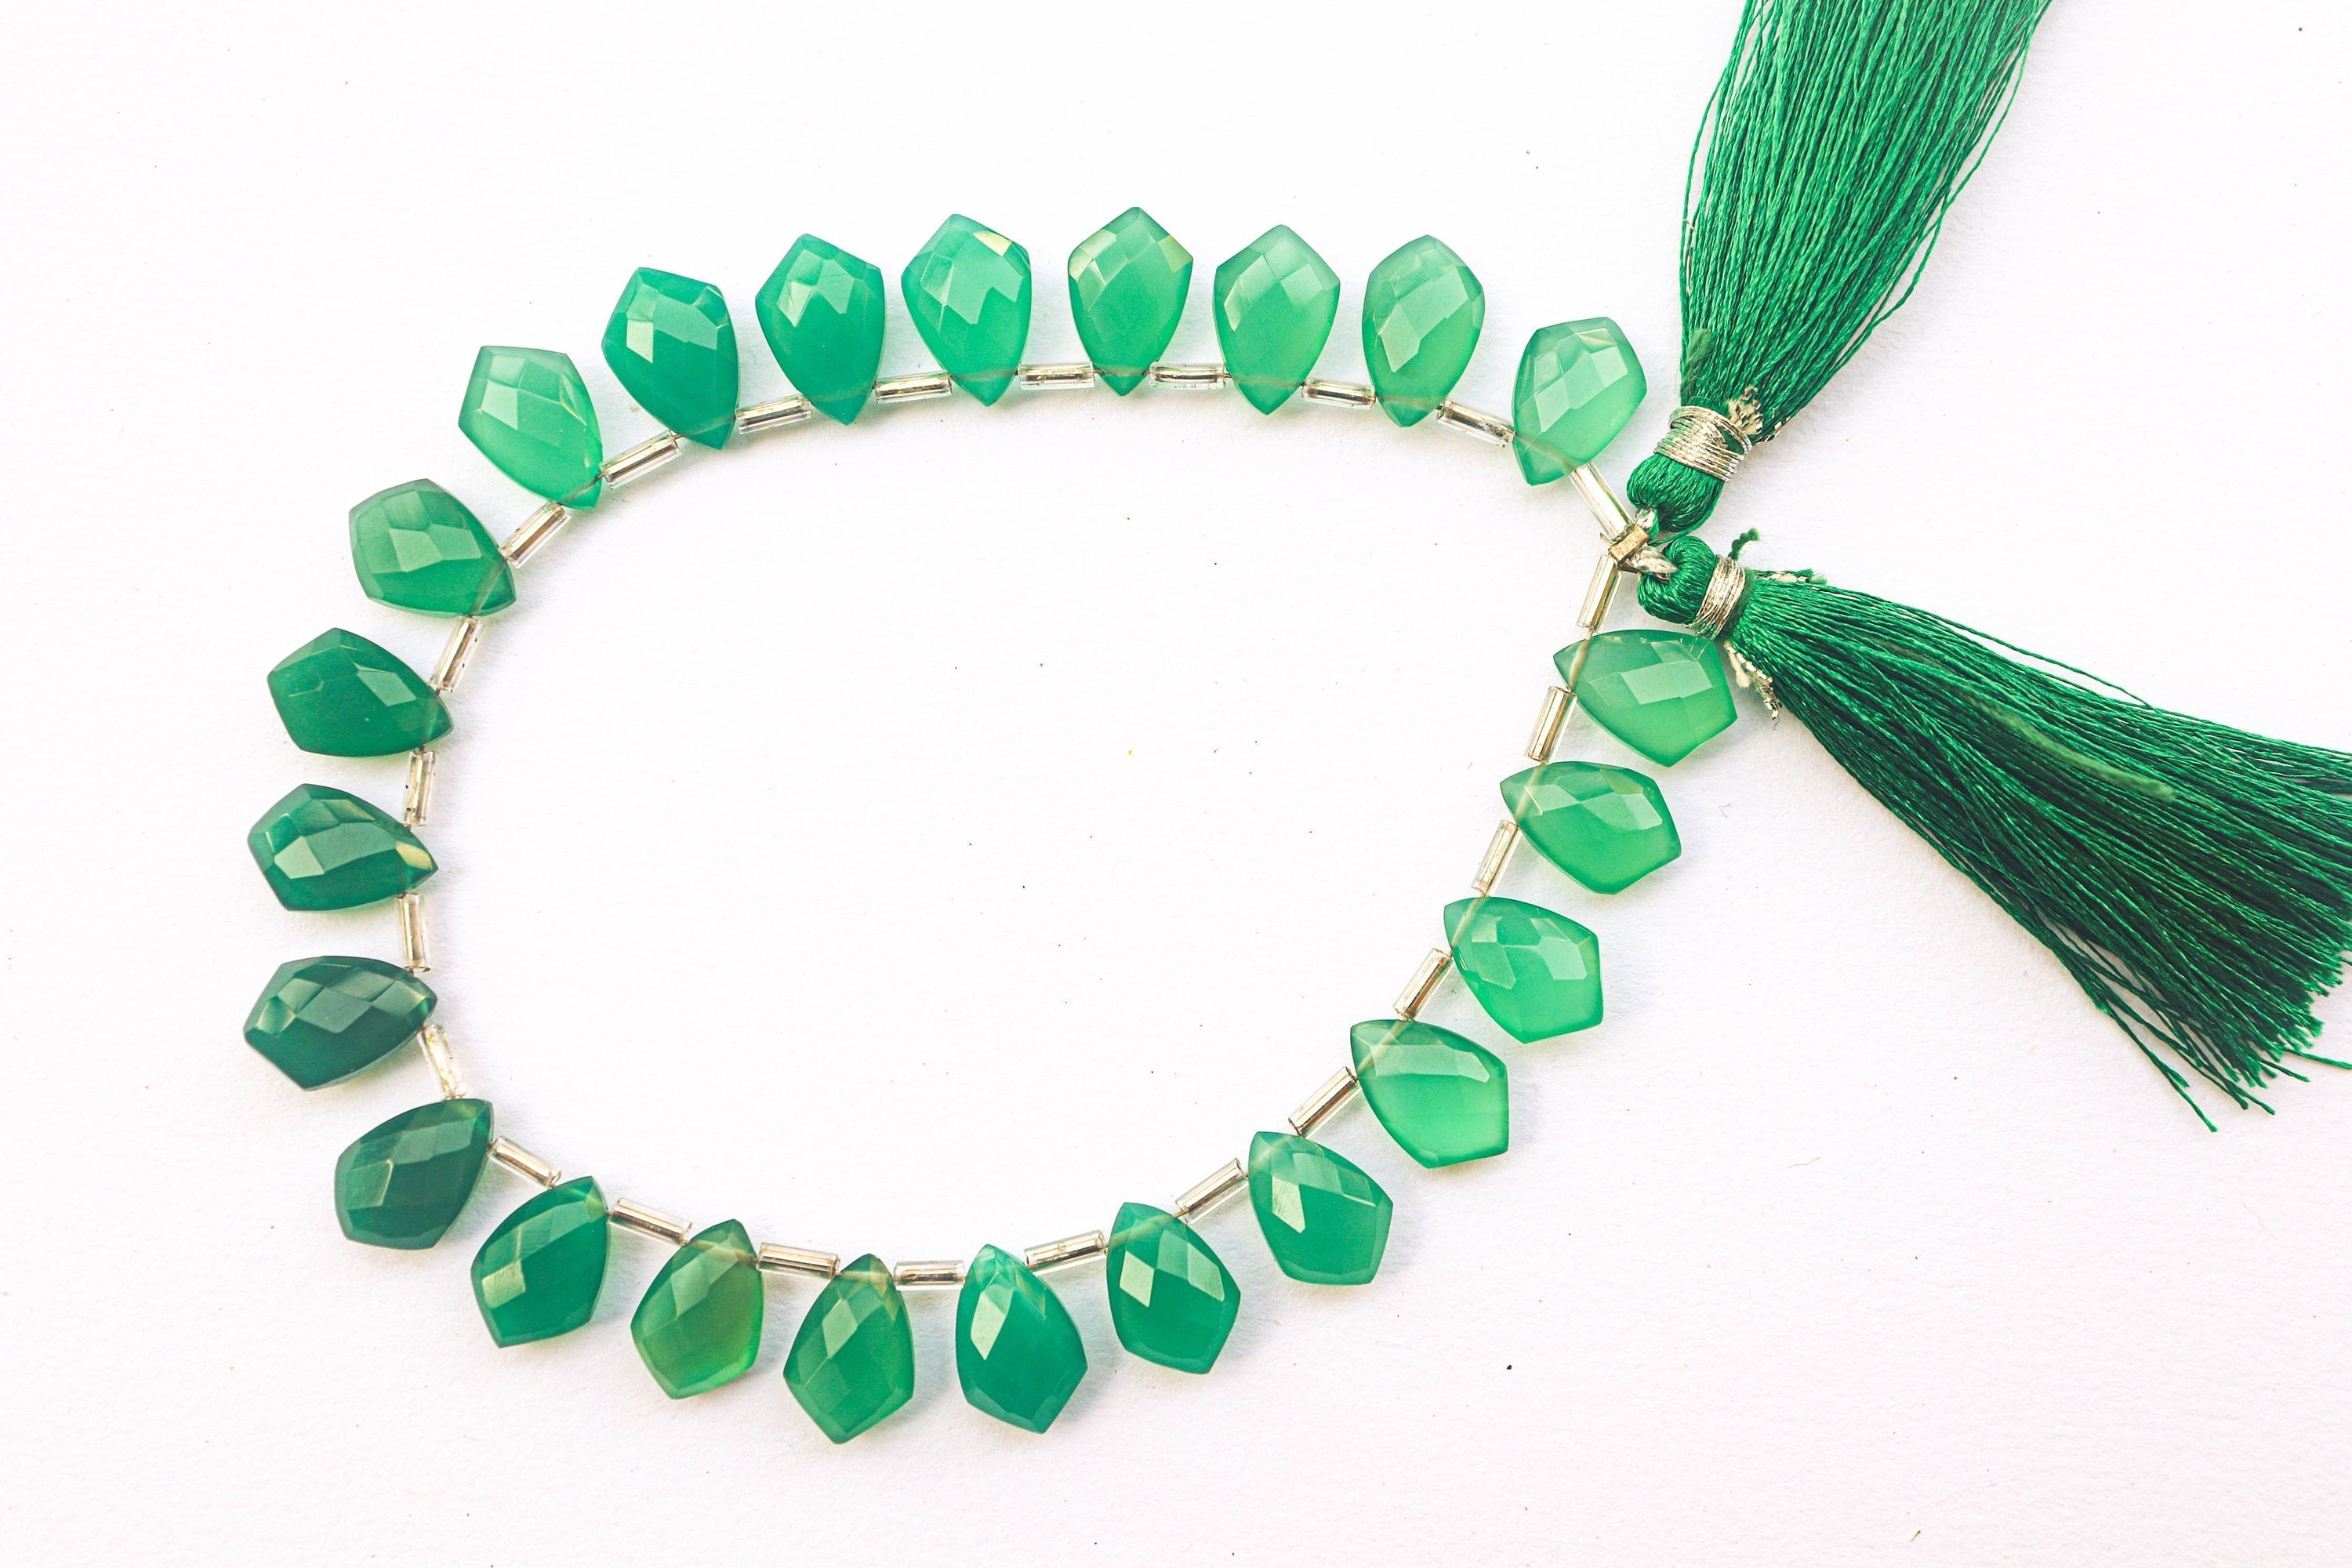 Green Onyx Fancy Shape Faceted Briolette | 8x12mm | 23 Pieces Strand | Beadsforyourjewelry | BFYJ1204-3 Beadsforyourjewelry